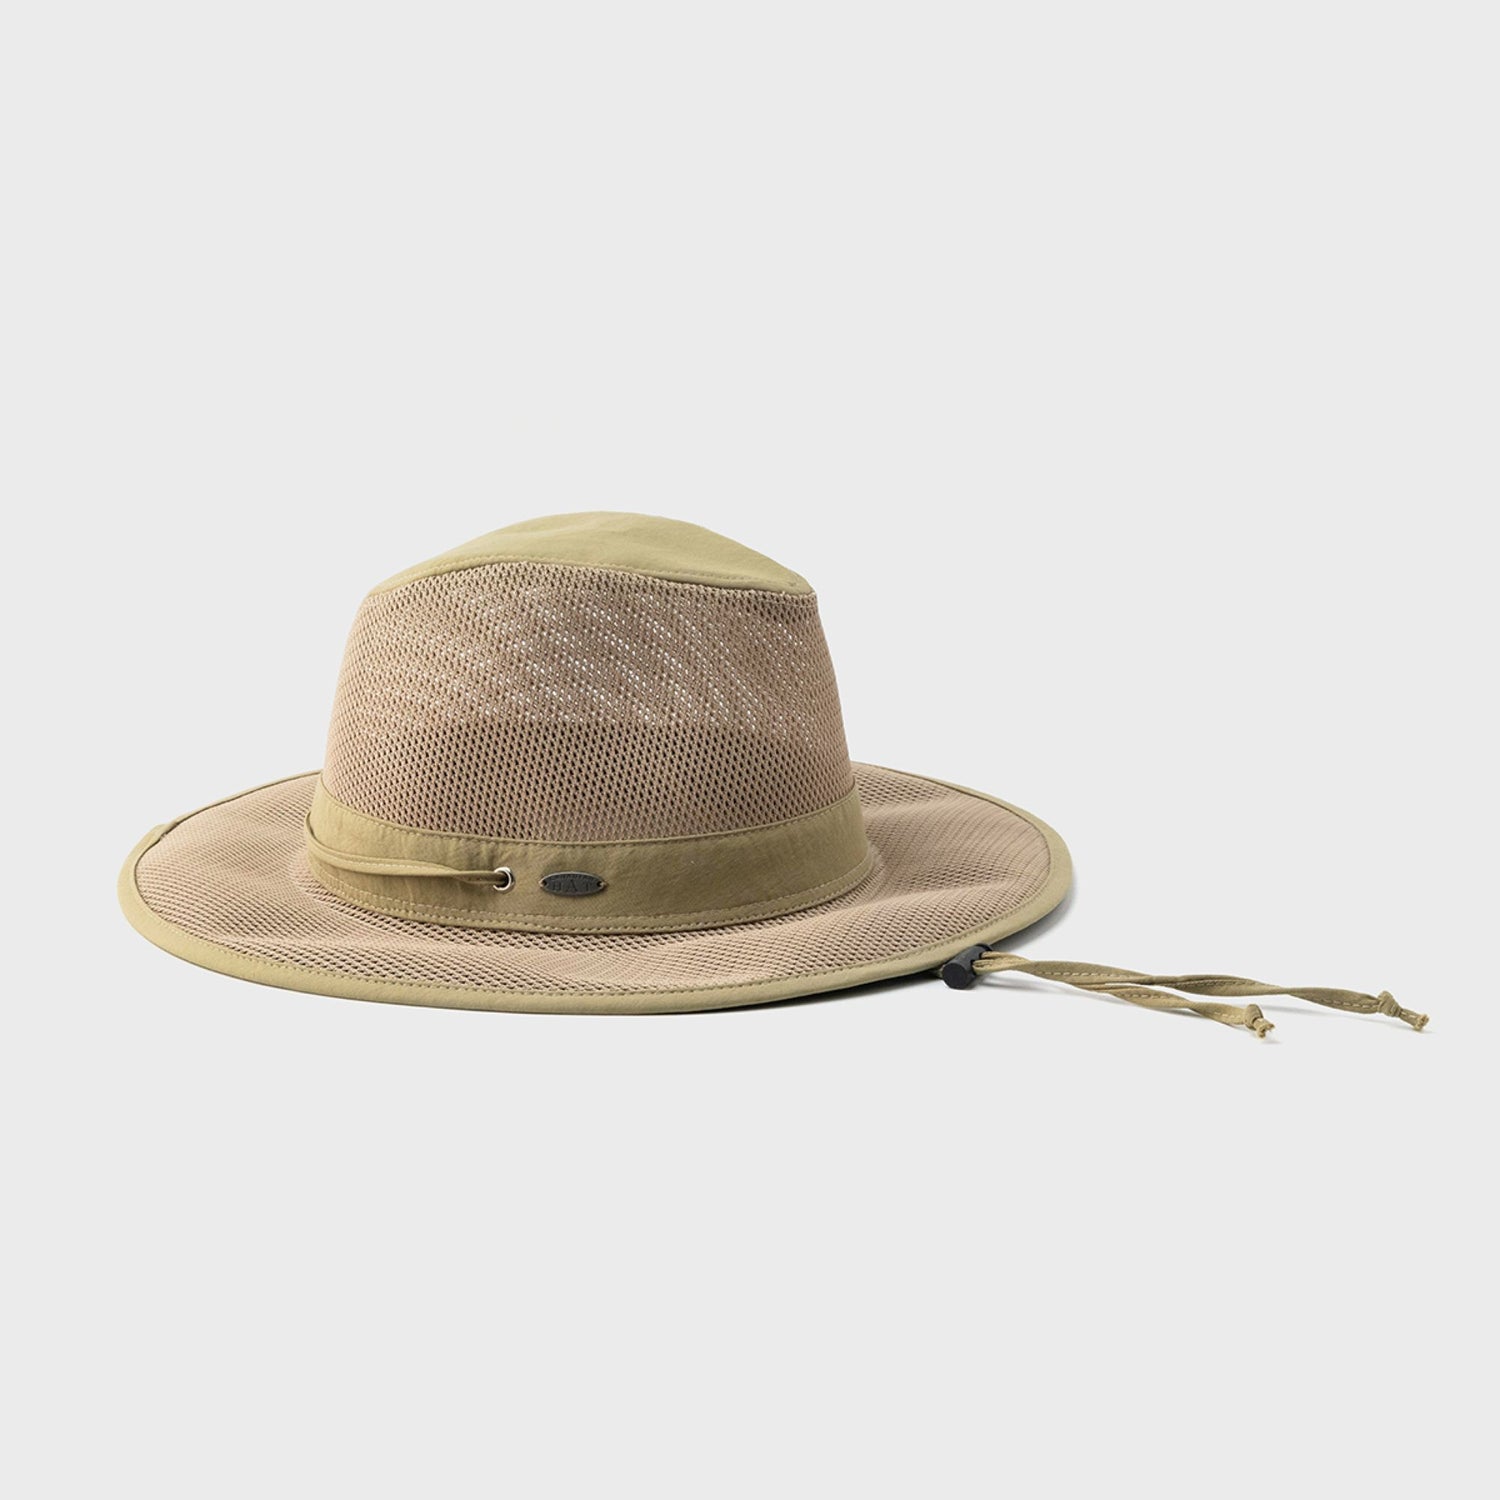 ORSO - OUTBACK MESH HAT W CORD